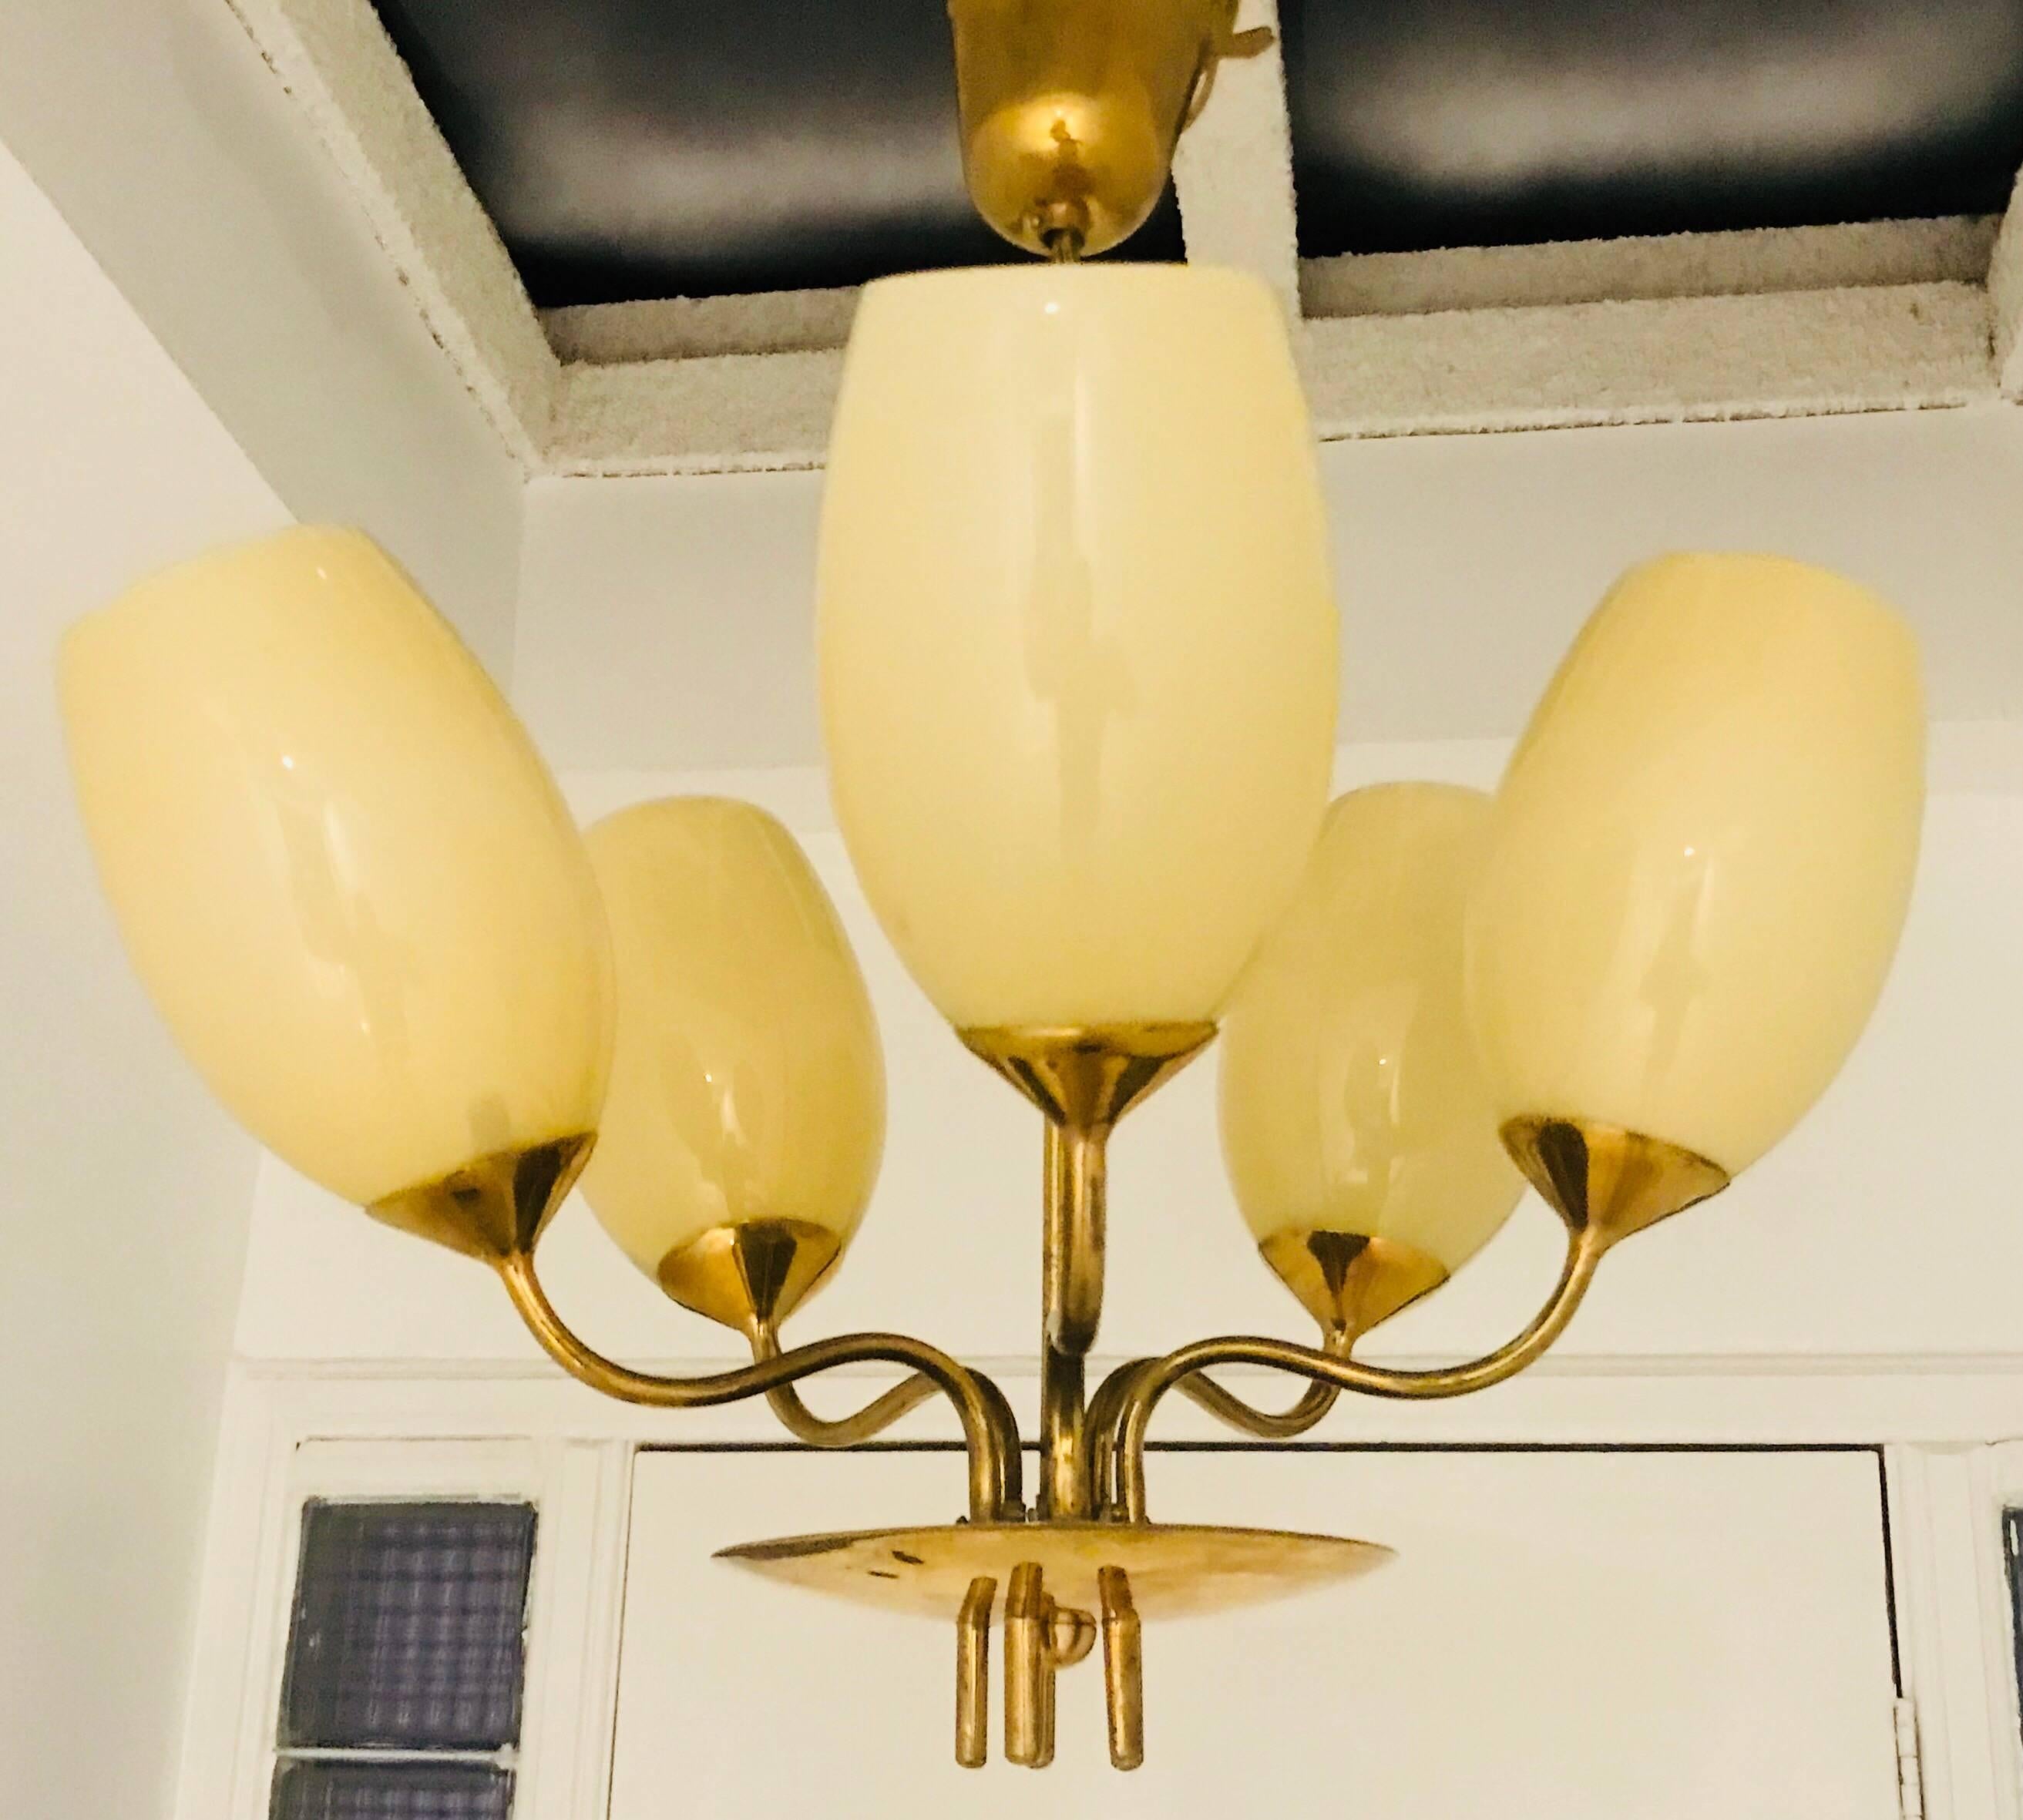 An original 1950s pendant chandelier composed of five custard glass shades and a golden brass fixture designed by the famed Finnish designer, Paavo Tynell. Newly rewired.